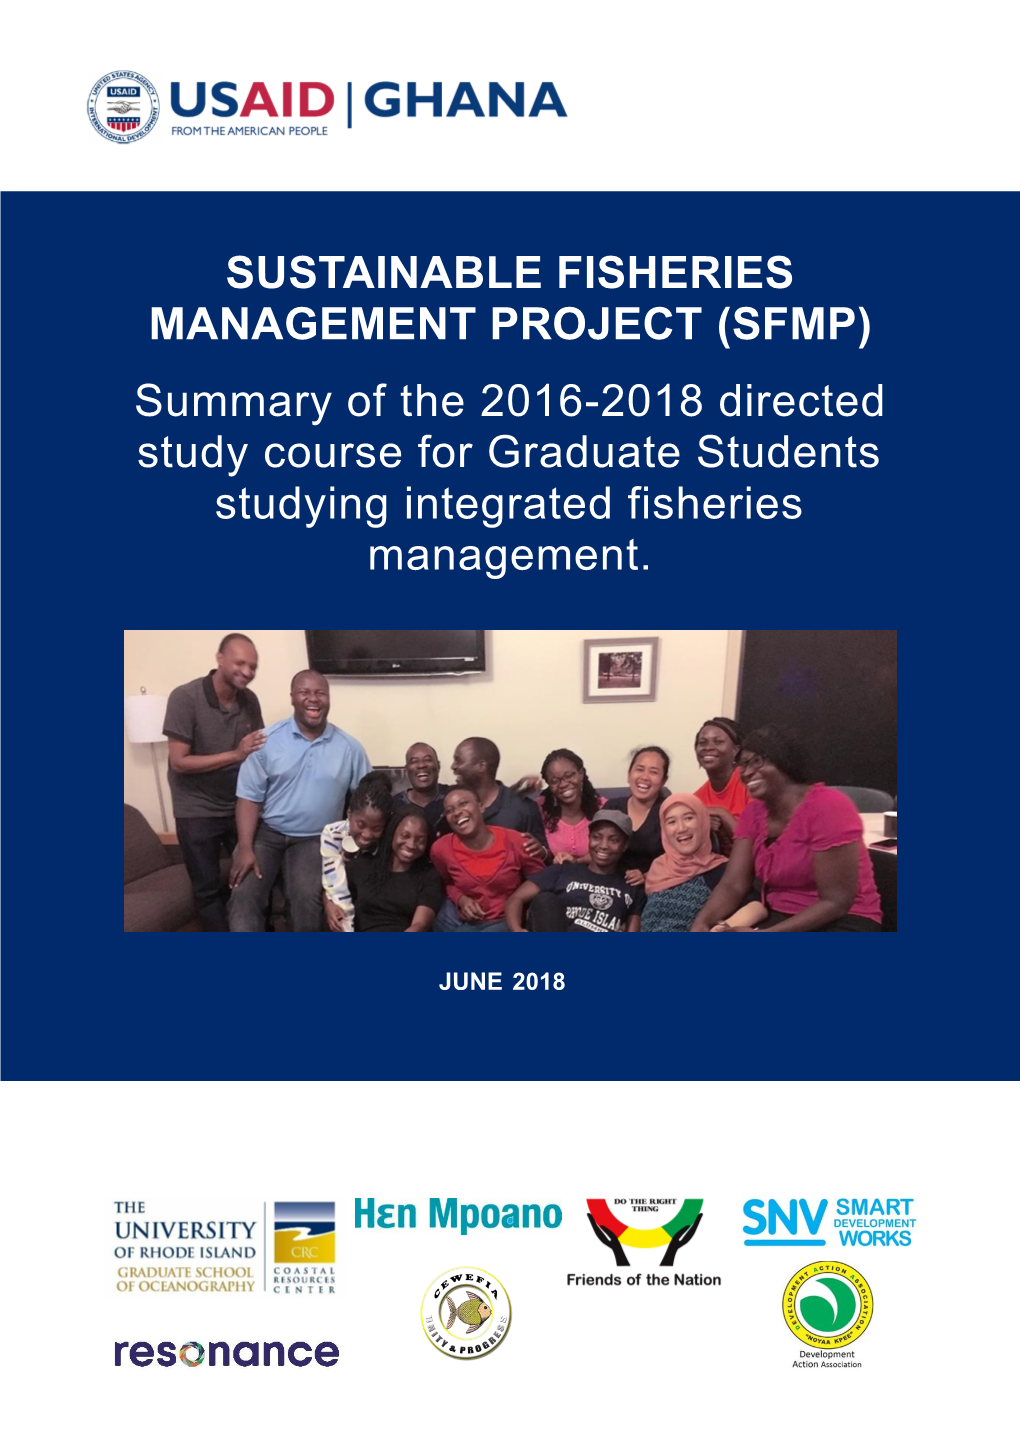 Summary of the 2016-2018 Directed Study Course for Graduate Students Studying Integrated Fisheries Management